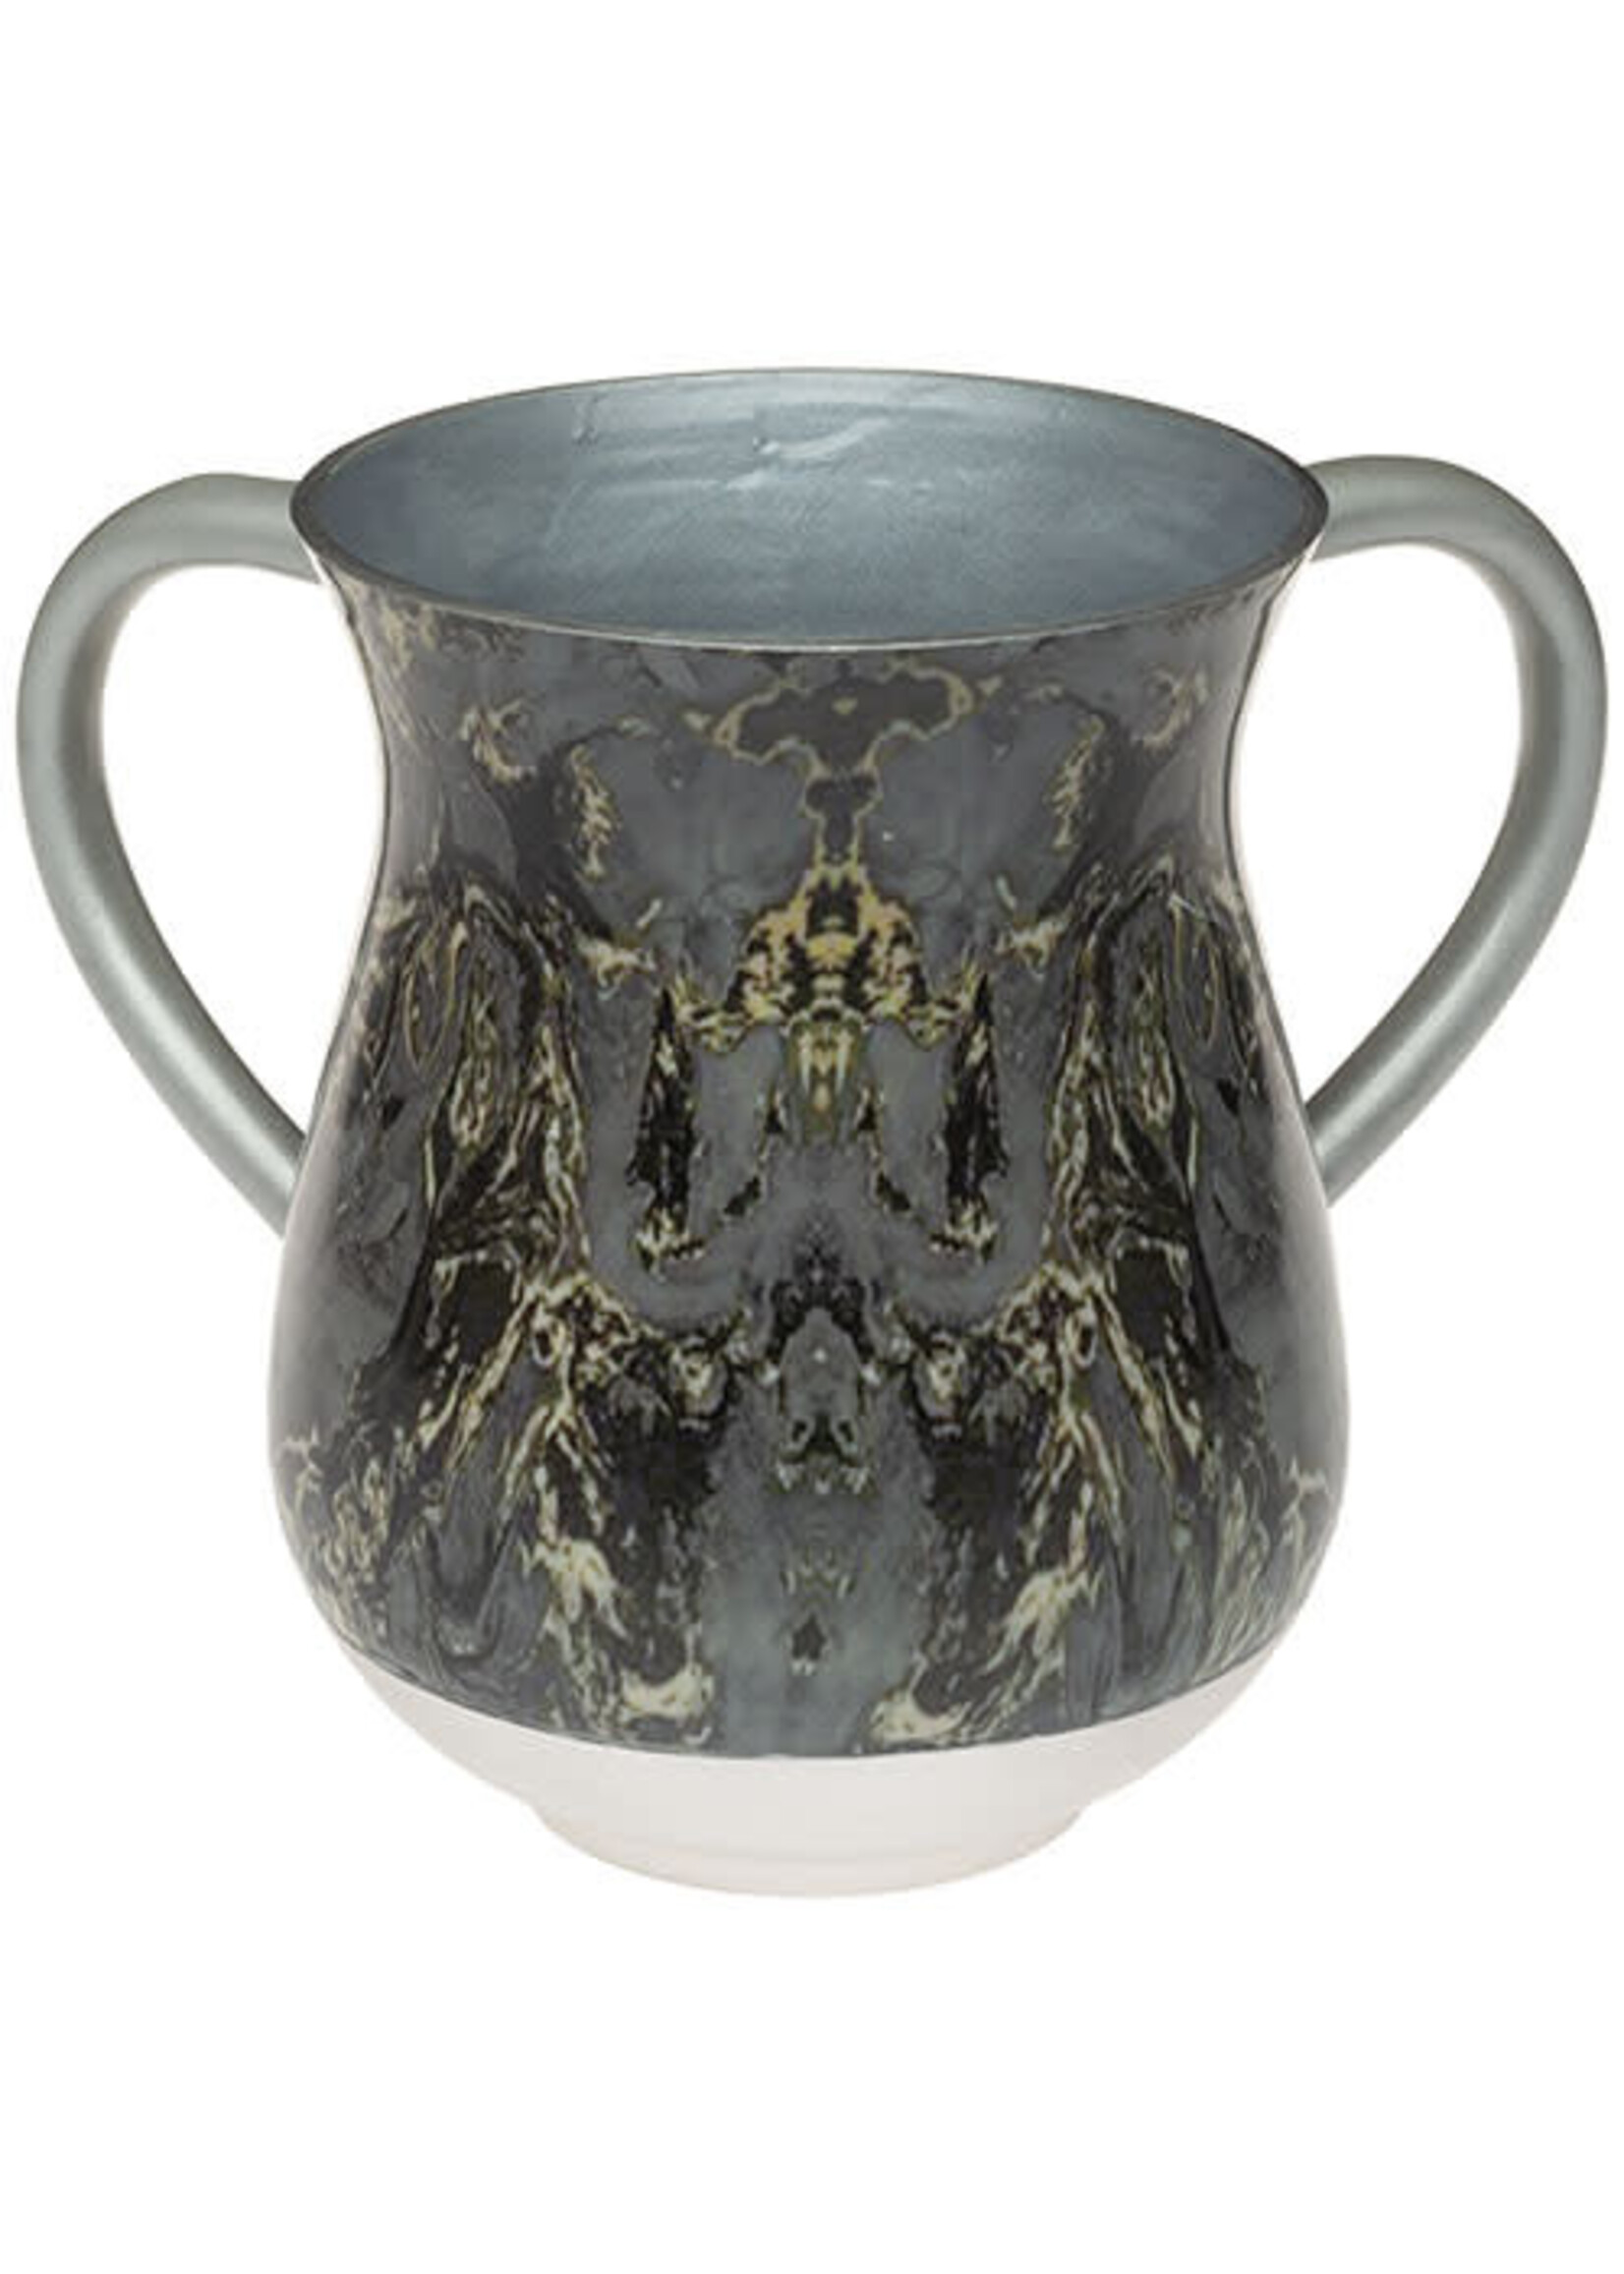 WASHING CUP MARBLE  PRINT GREY/GOLD